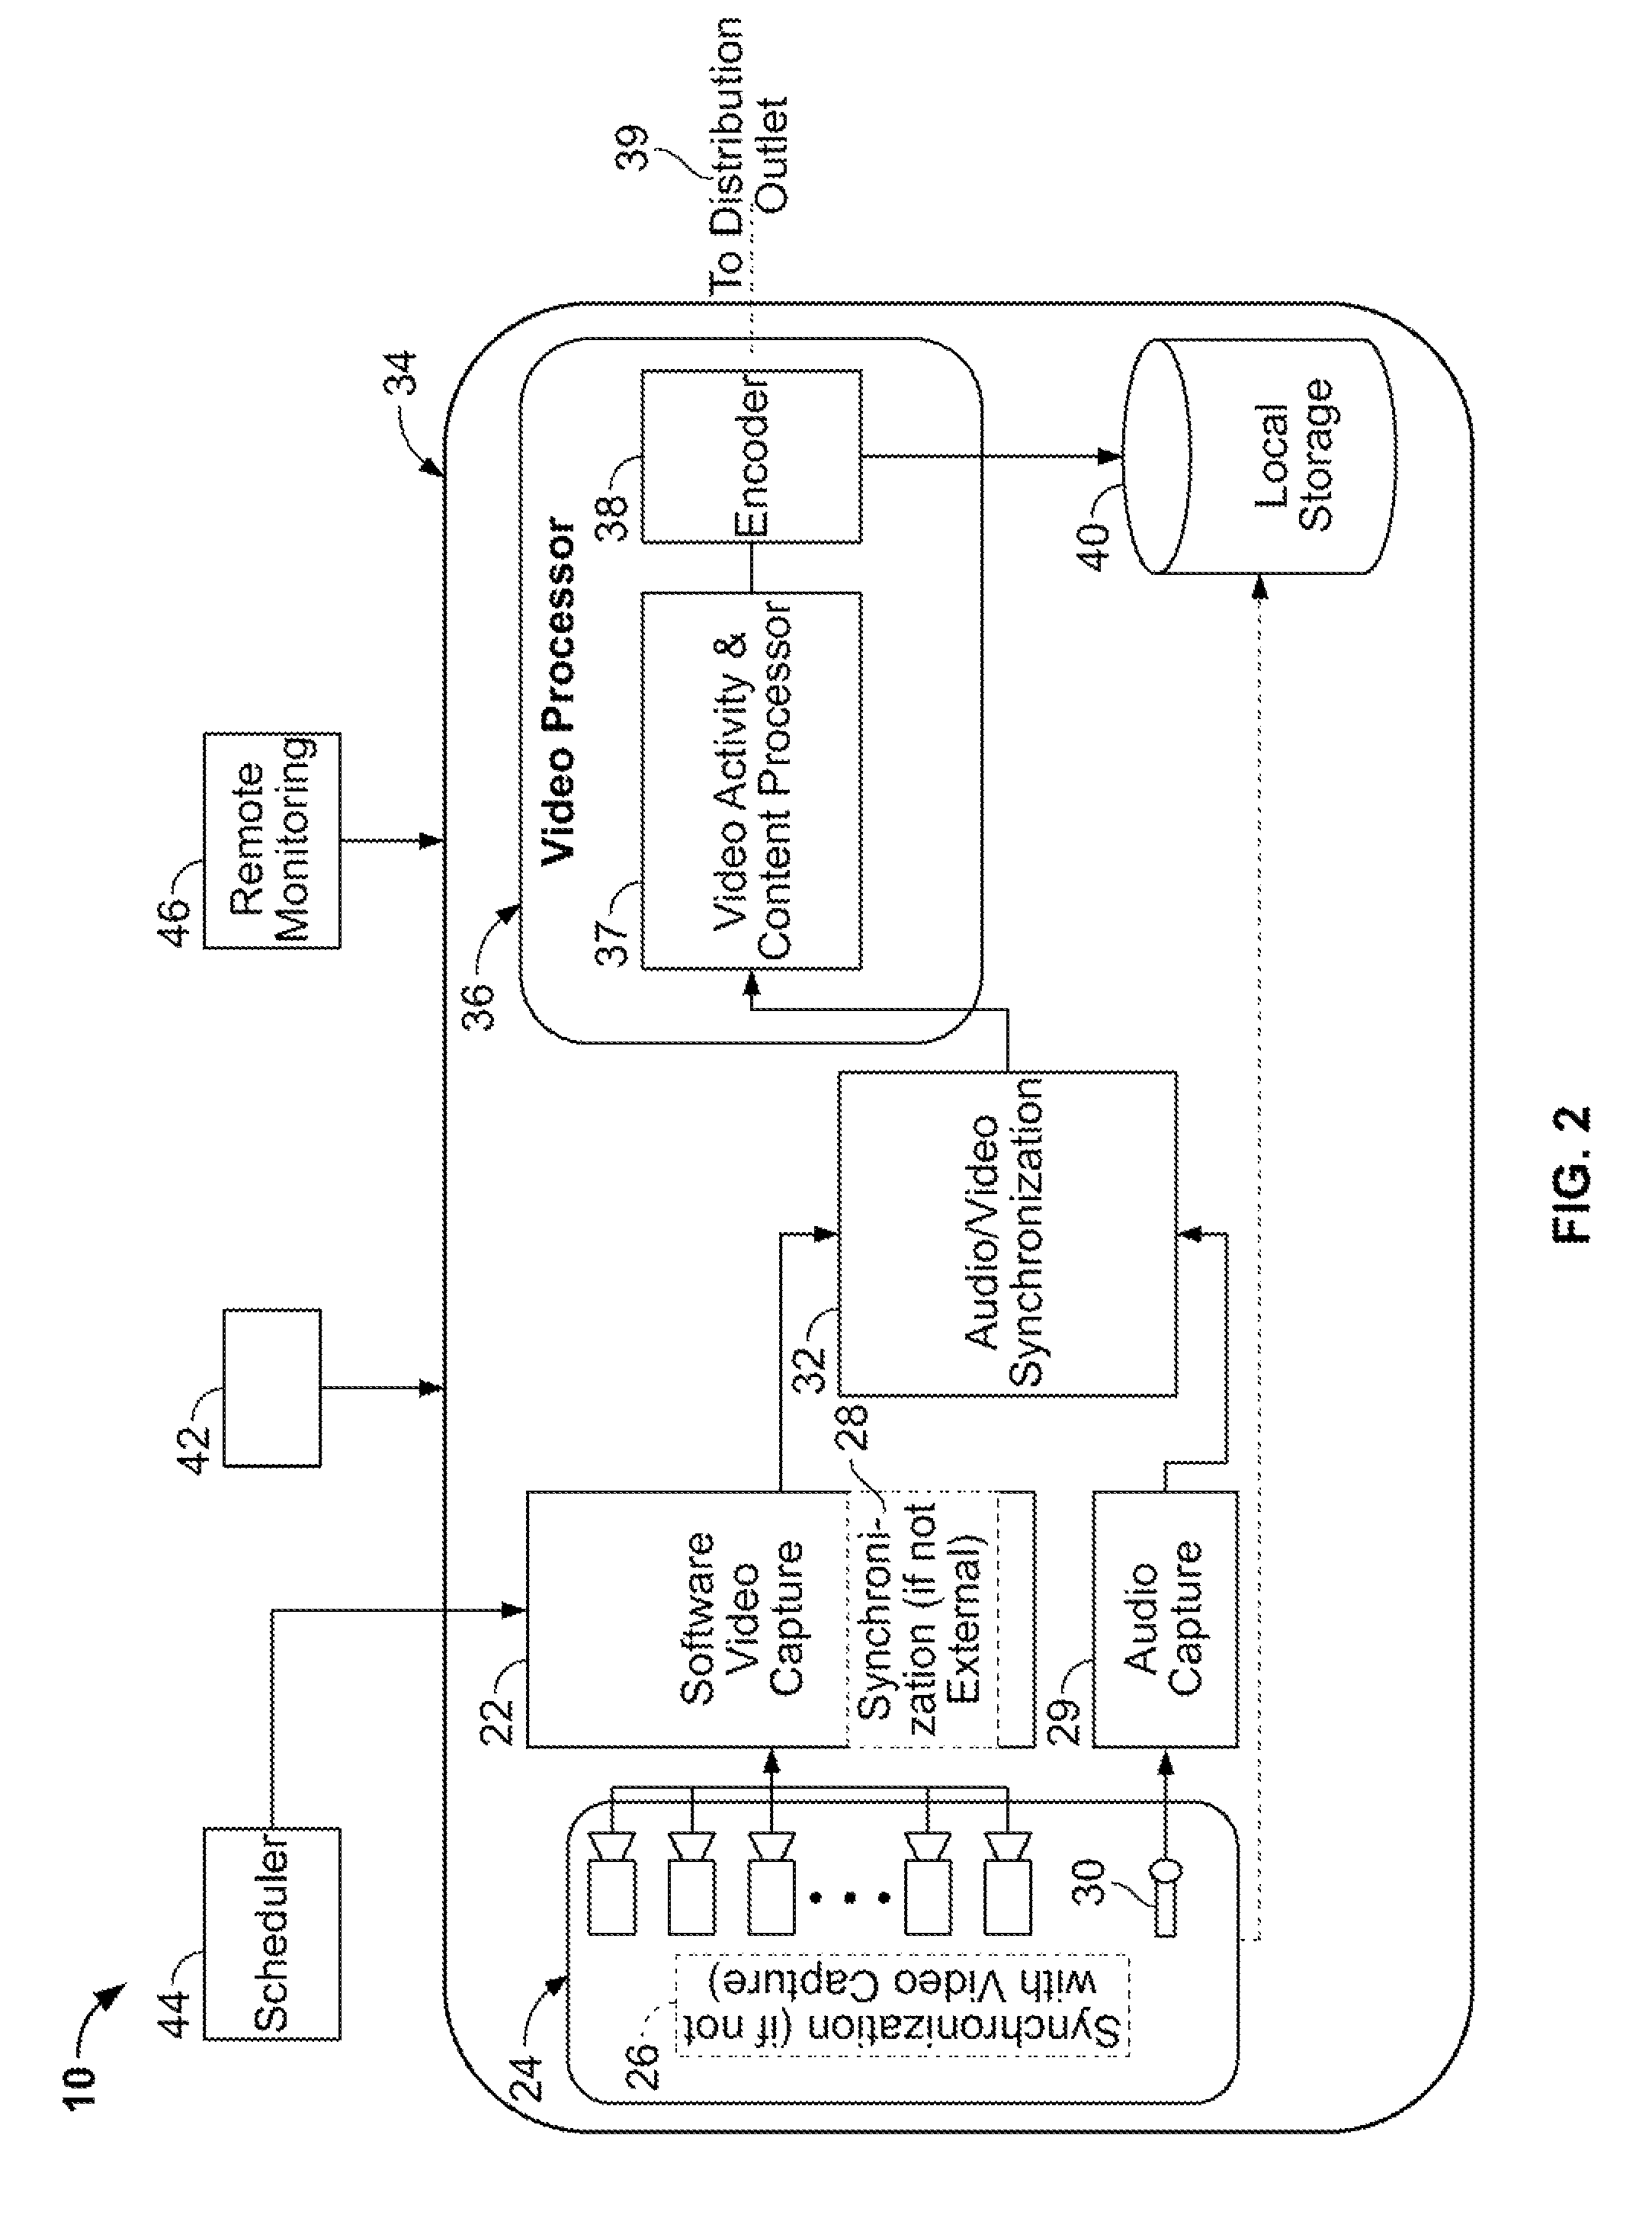 Apparatus for intelligent and autonomous video content generation and streaming